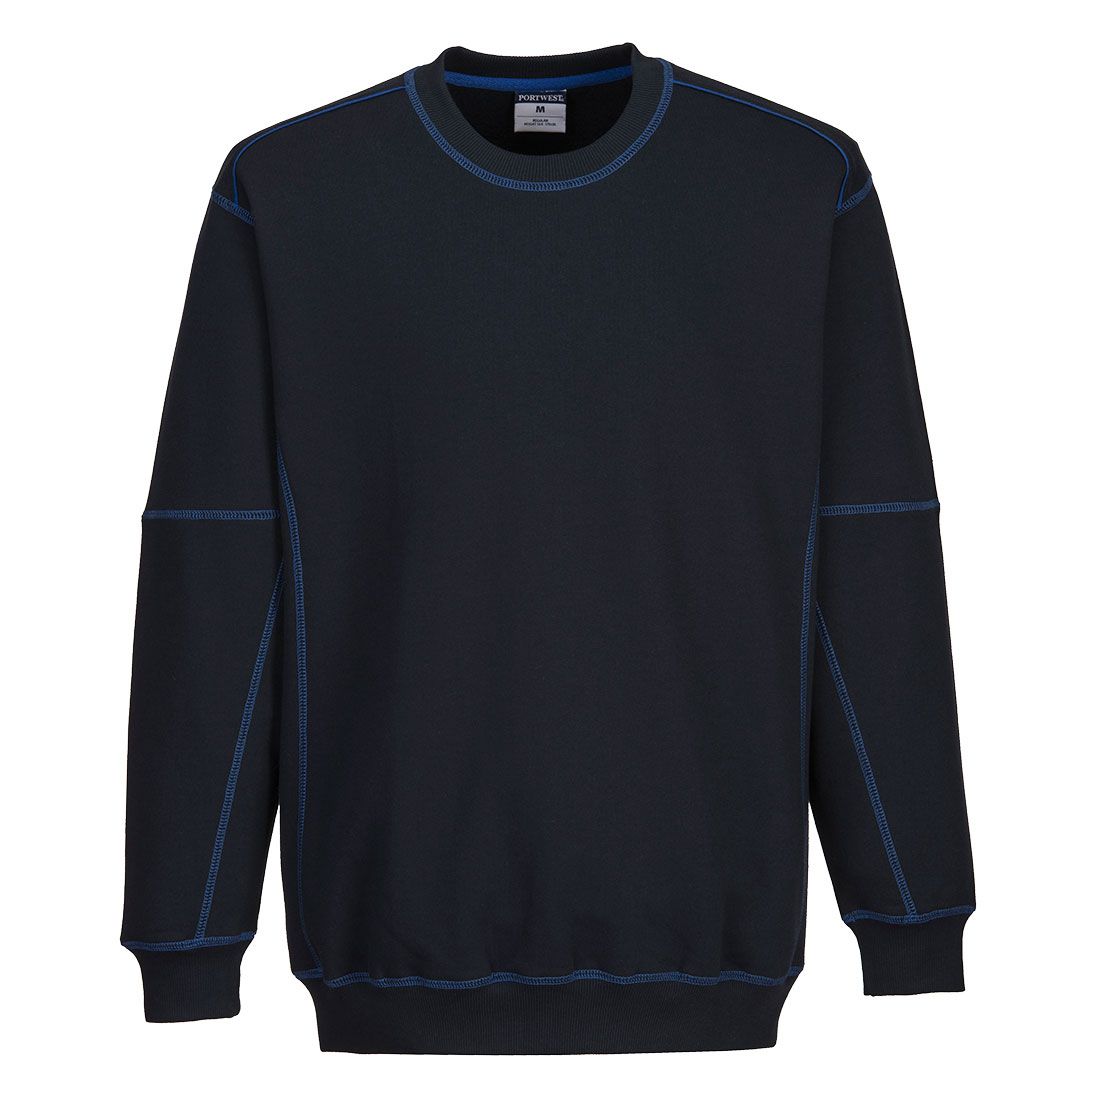 Sweatshirts | Work Tops & Jumpers for a Professional Winter Uniform